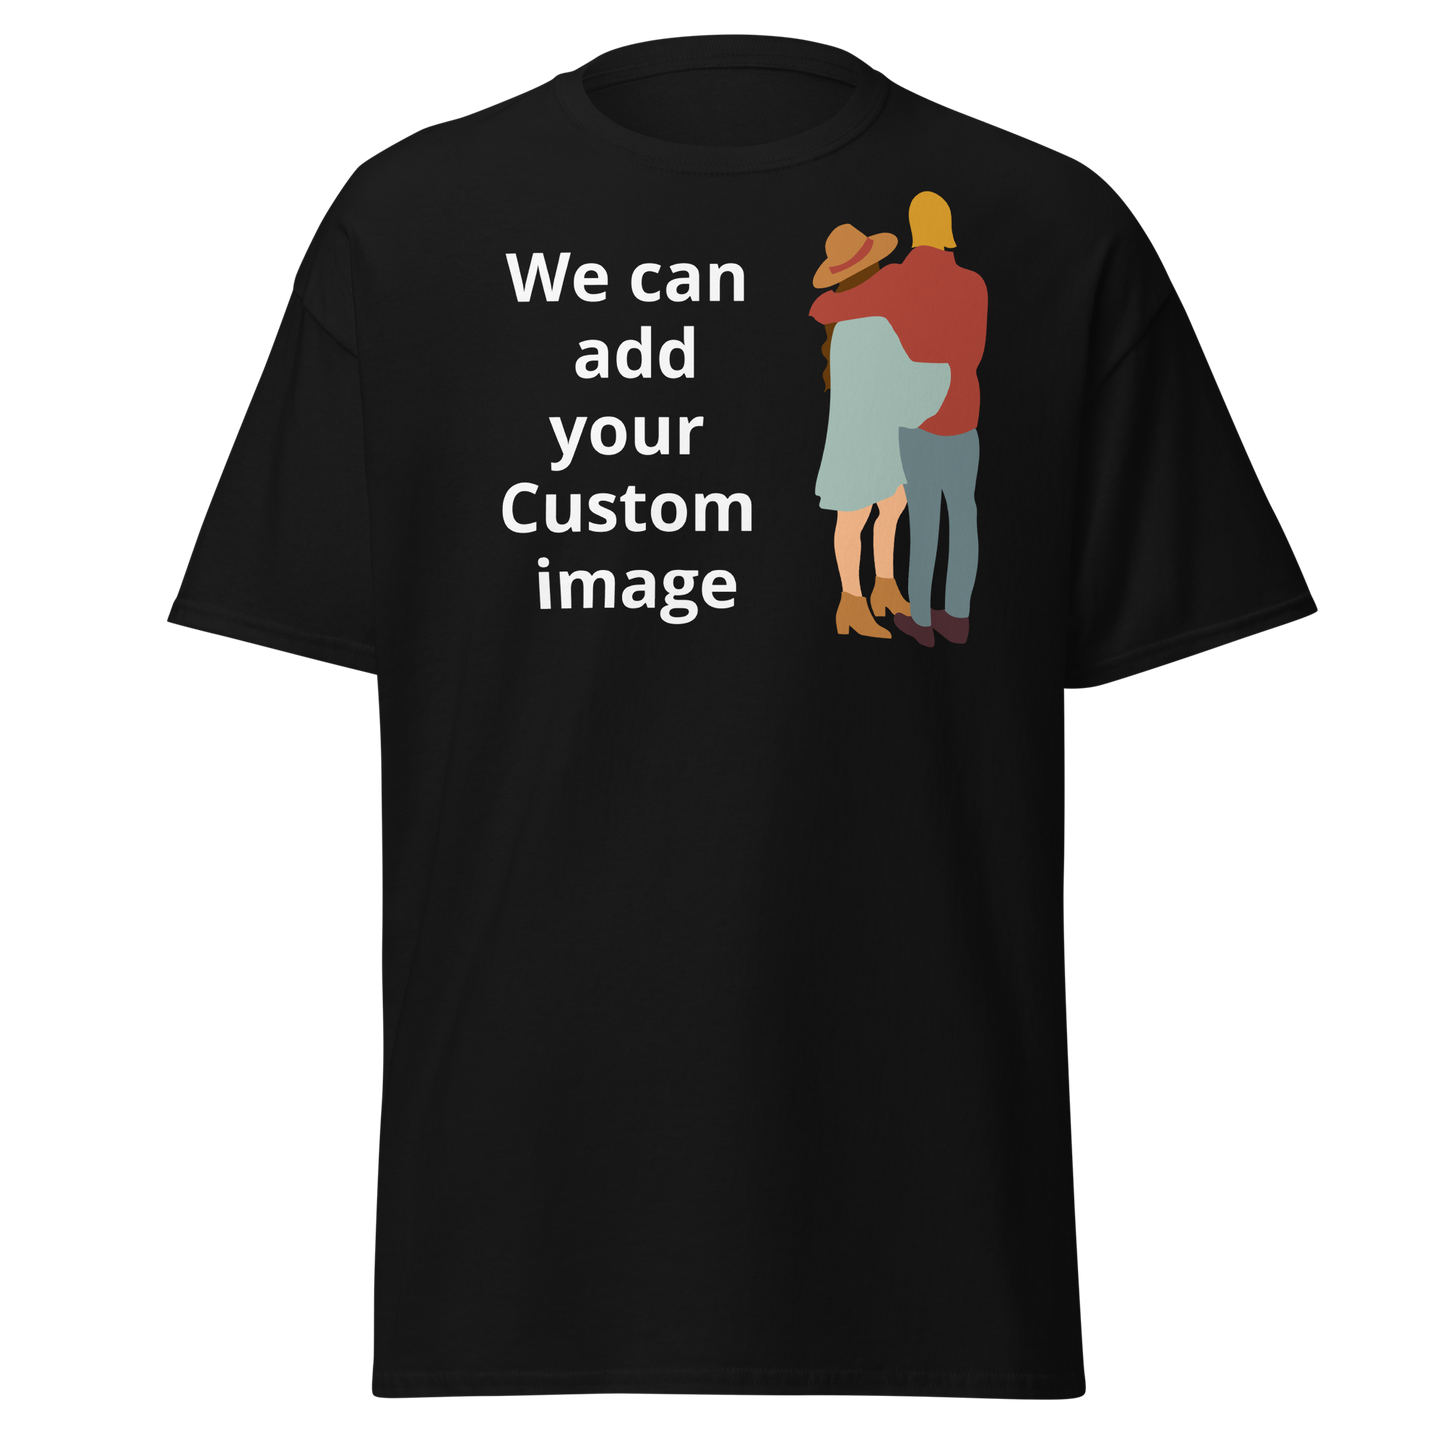 Personalised Custom T shirt with Custom image - Just send your text or image